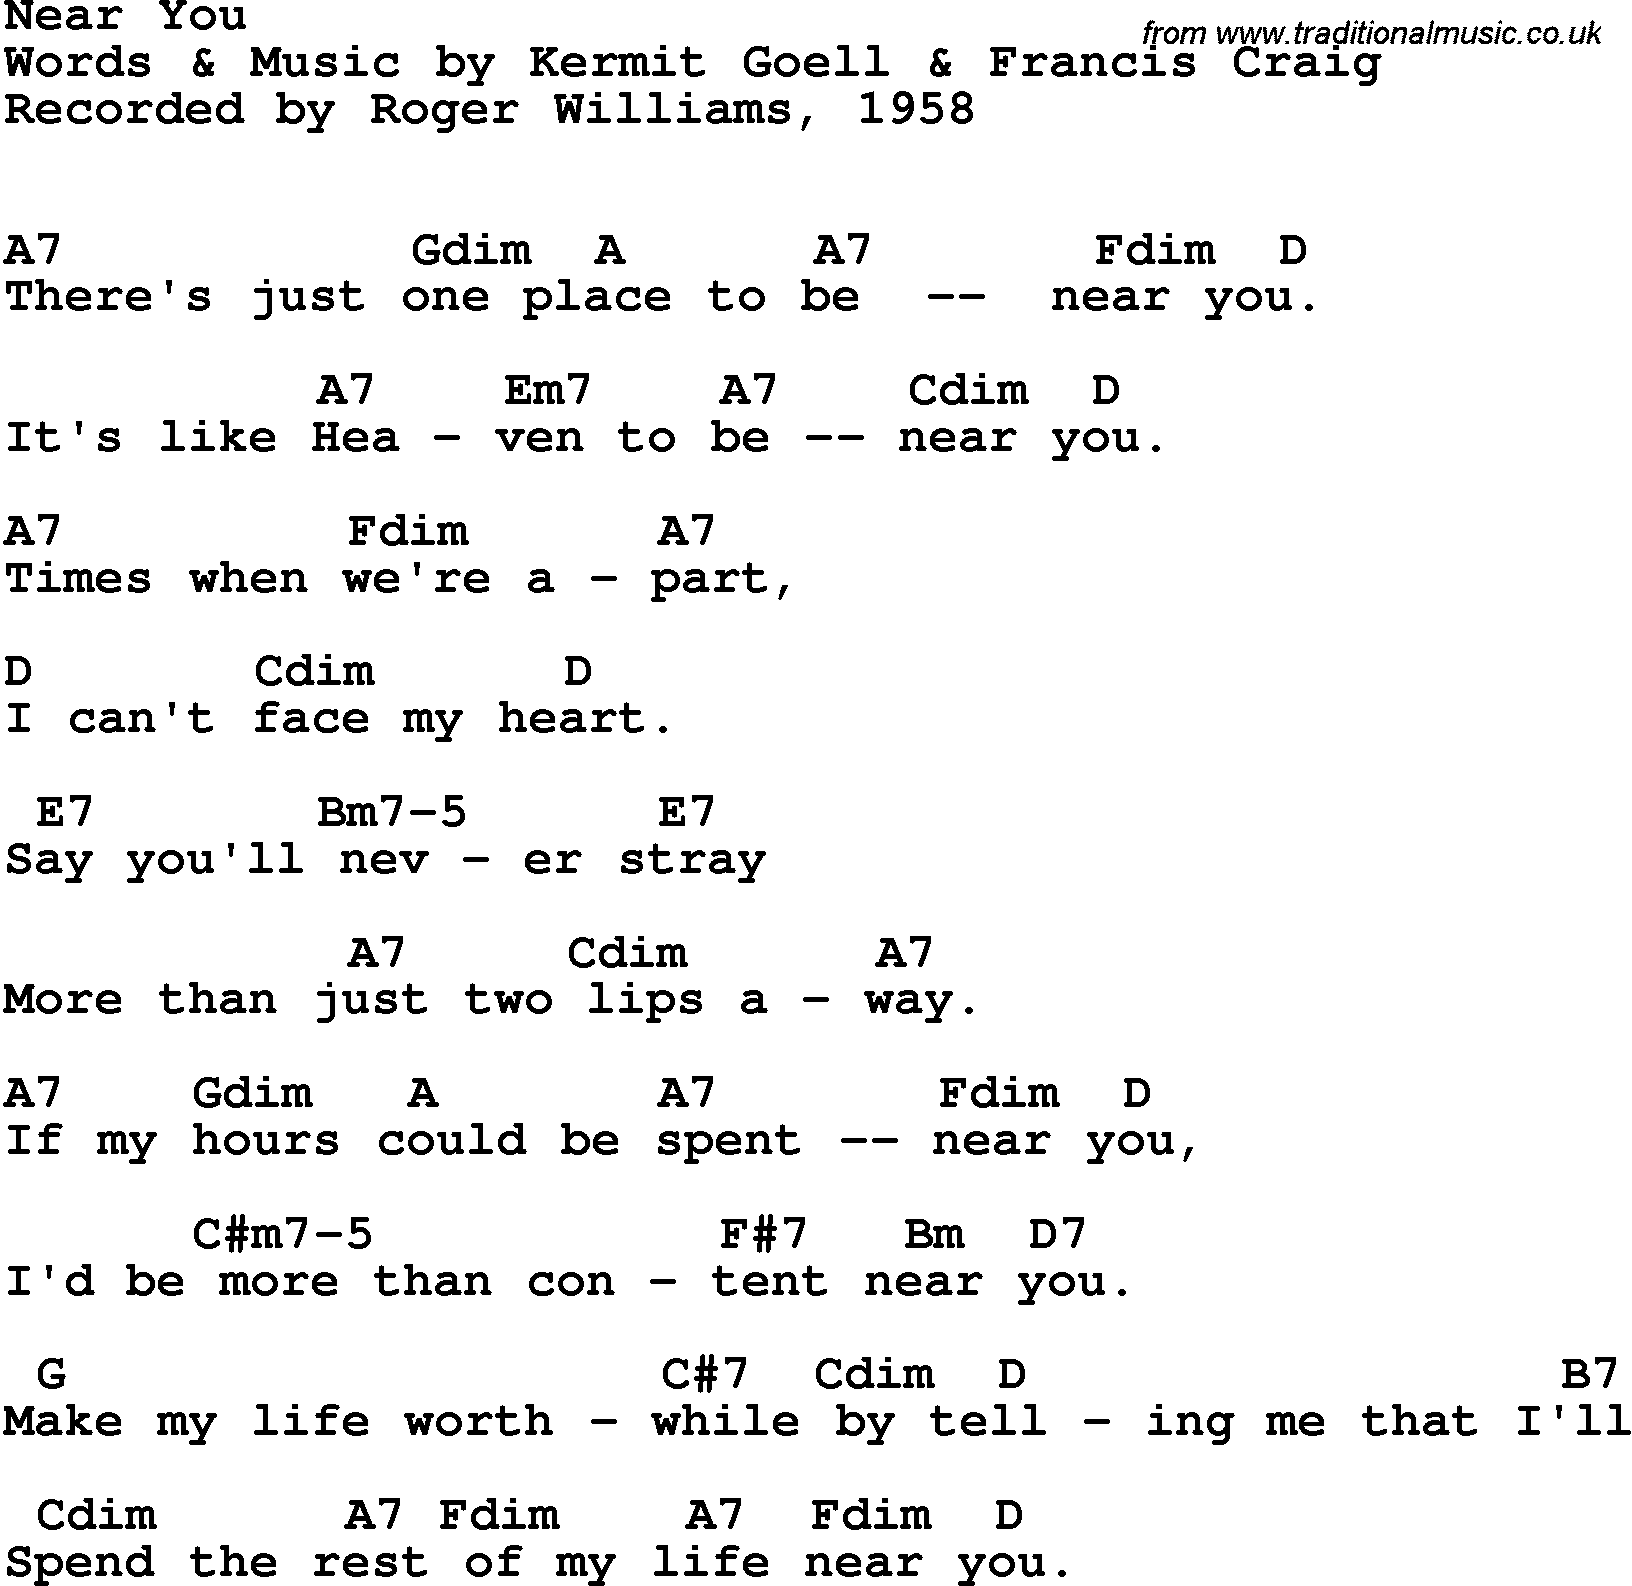 Song Lyrics with guitar chords for Near You - Roger Williams, 1958